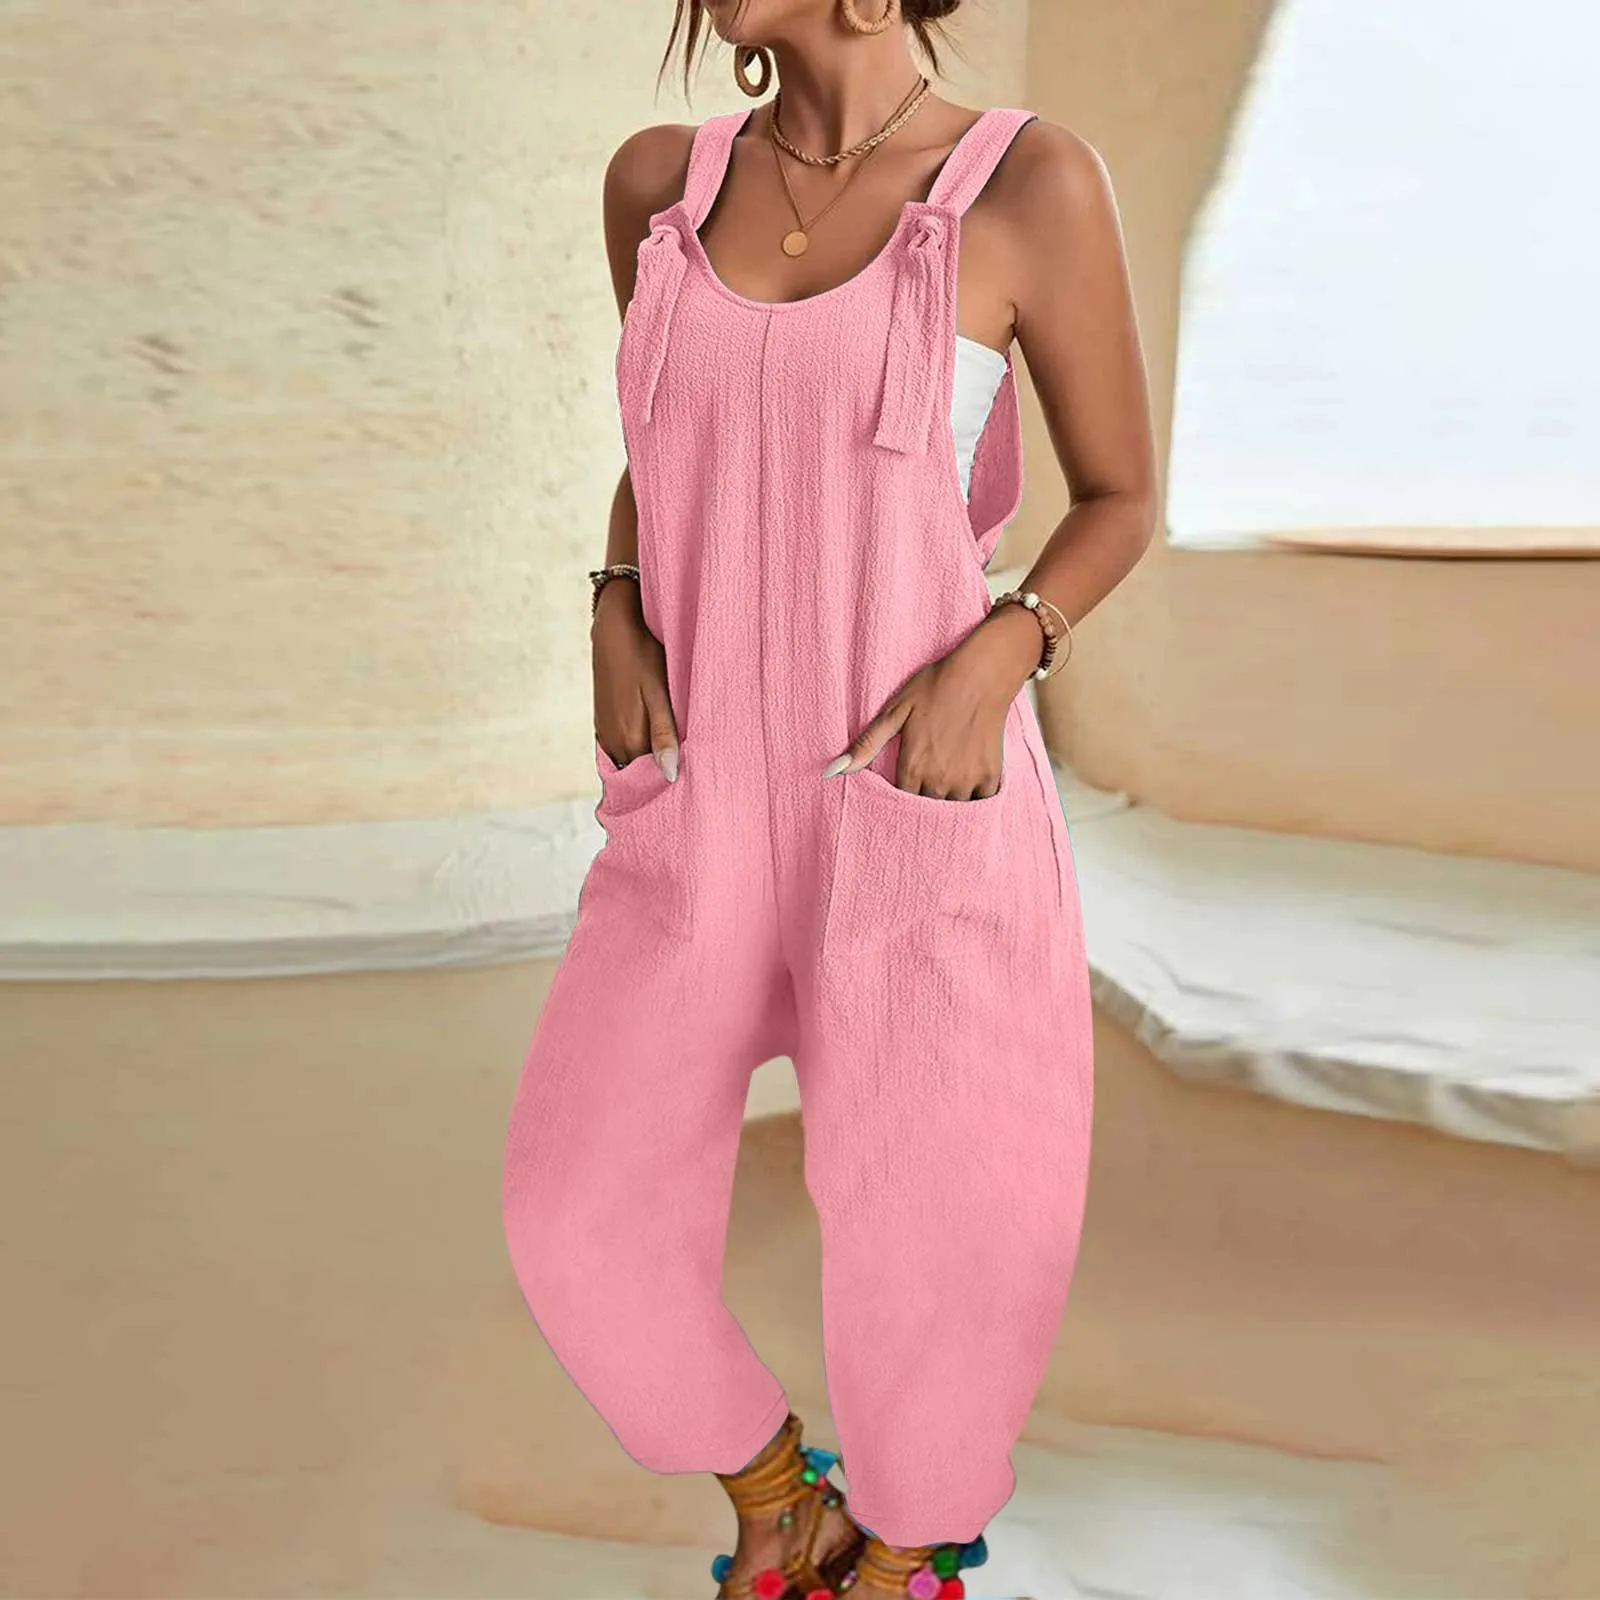 

Women Casual U Neck Sleeveless Jumpsuits Spaghetti Strap Baggy Overalls Harem Pants With Pocket Petite Belted Jumpsuit